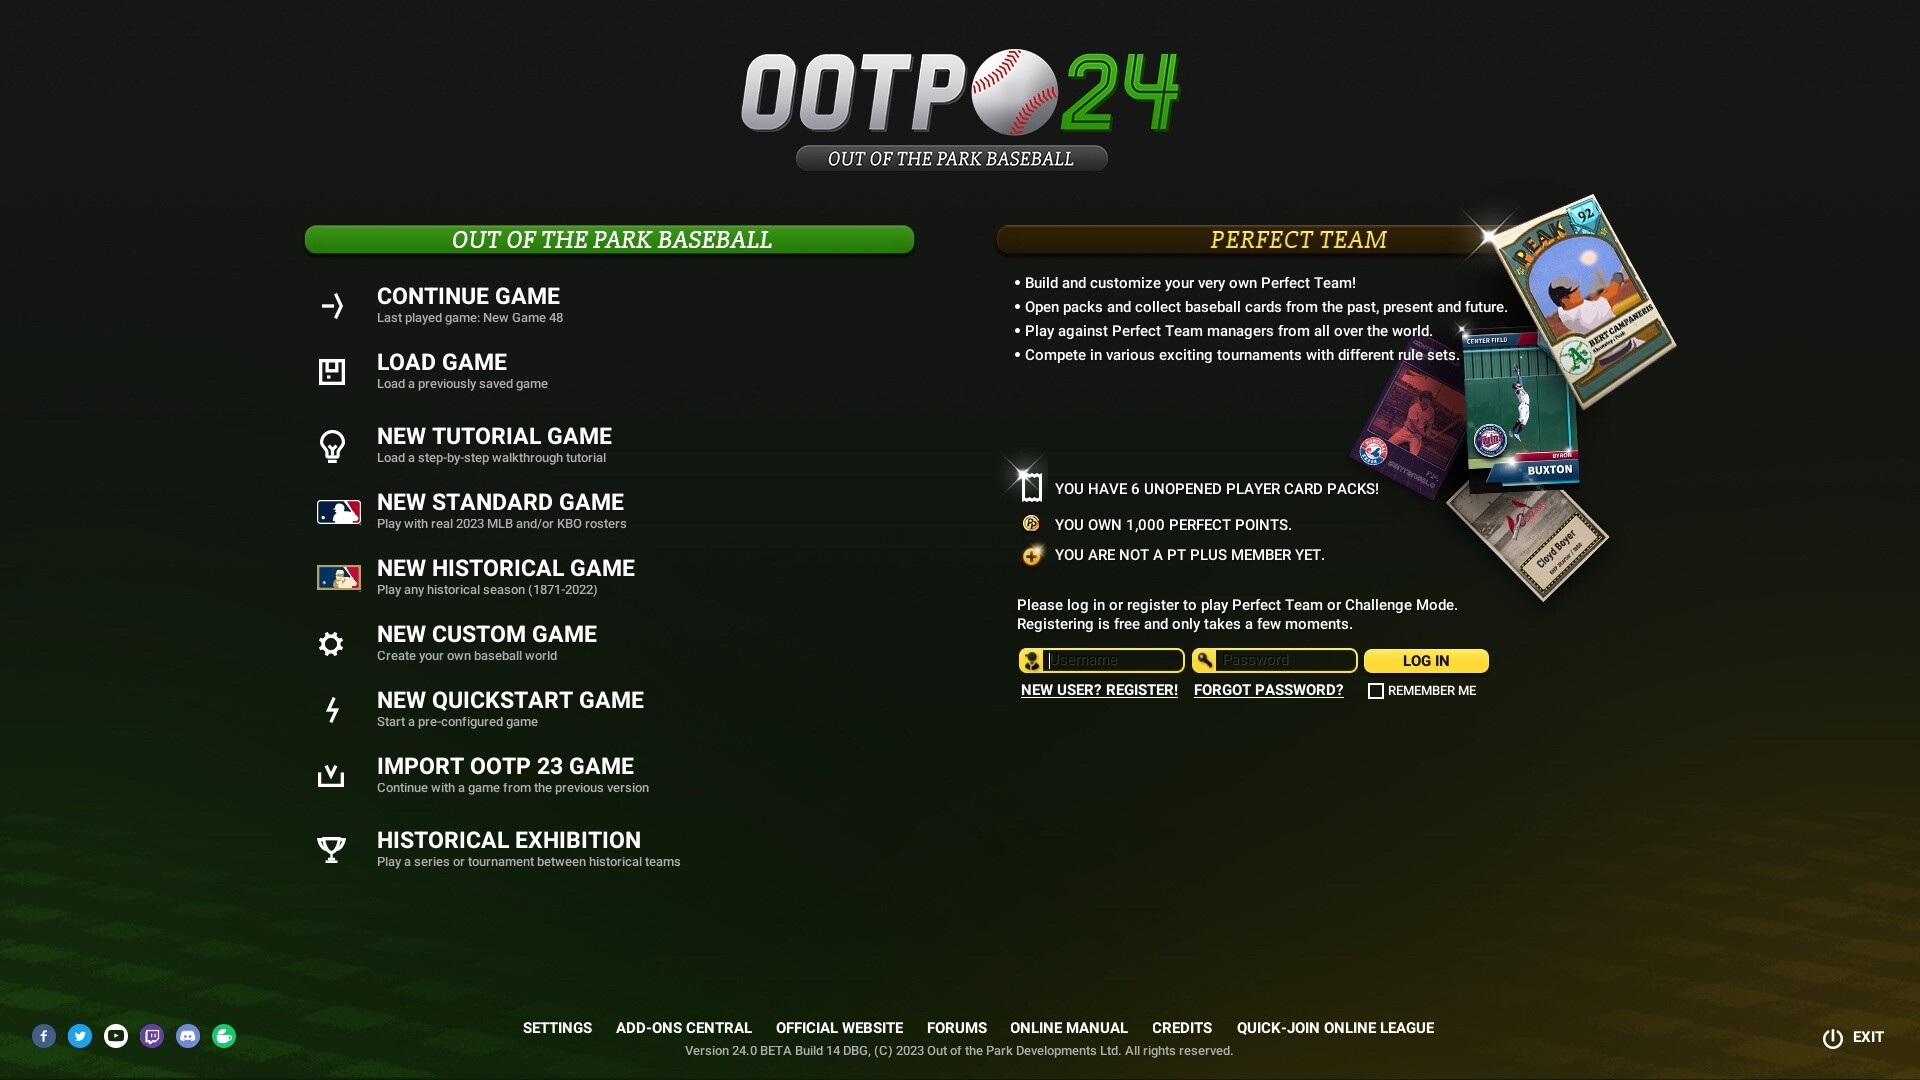 Out of the Park Baseball 24 Steam CD Key, 197.49$